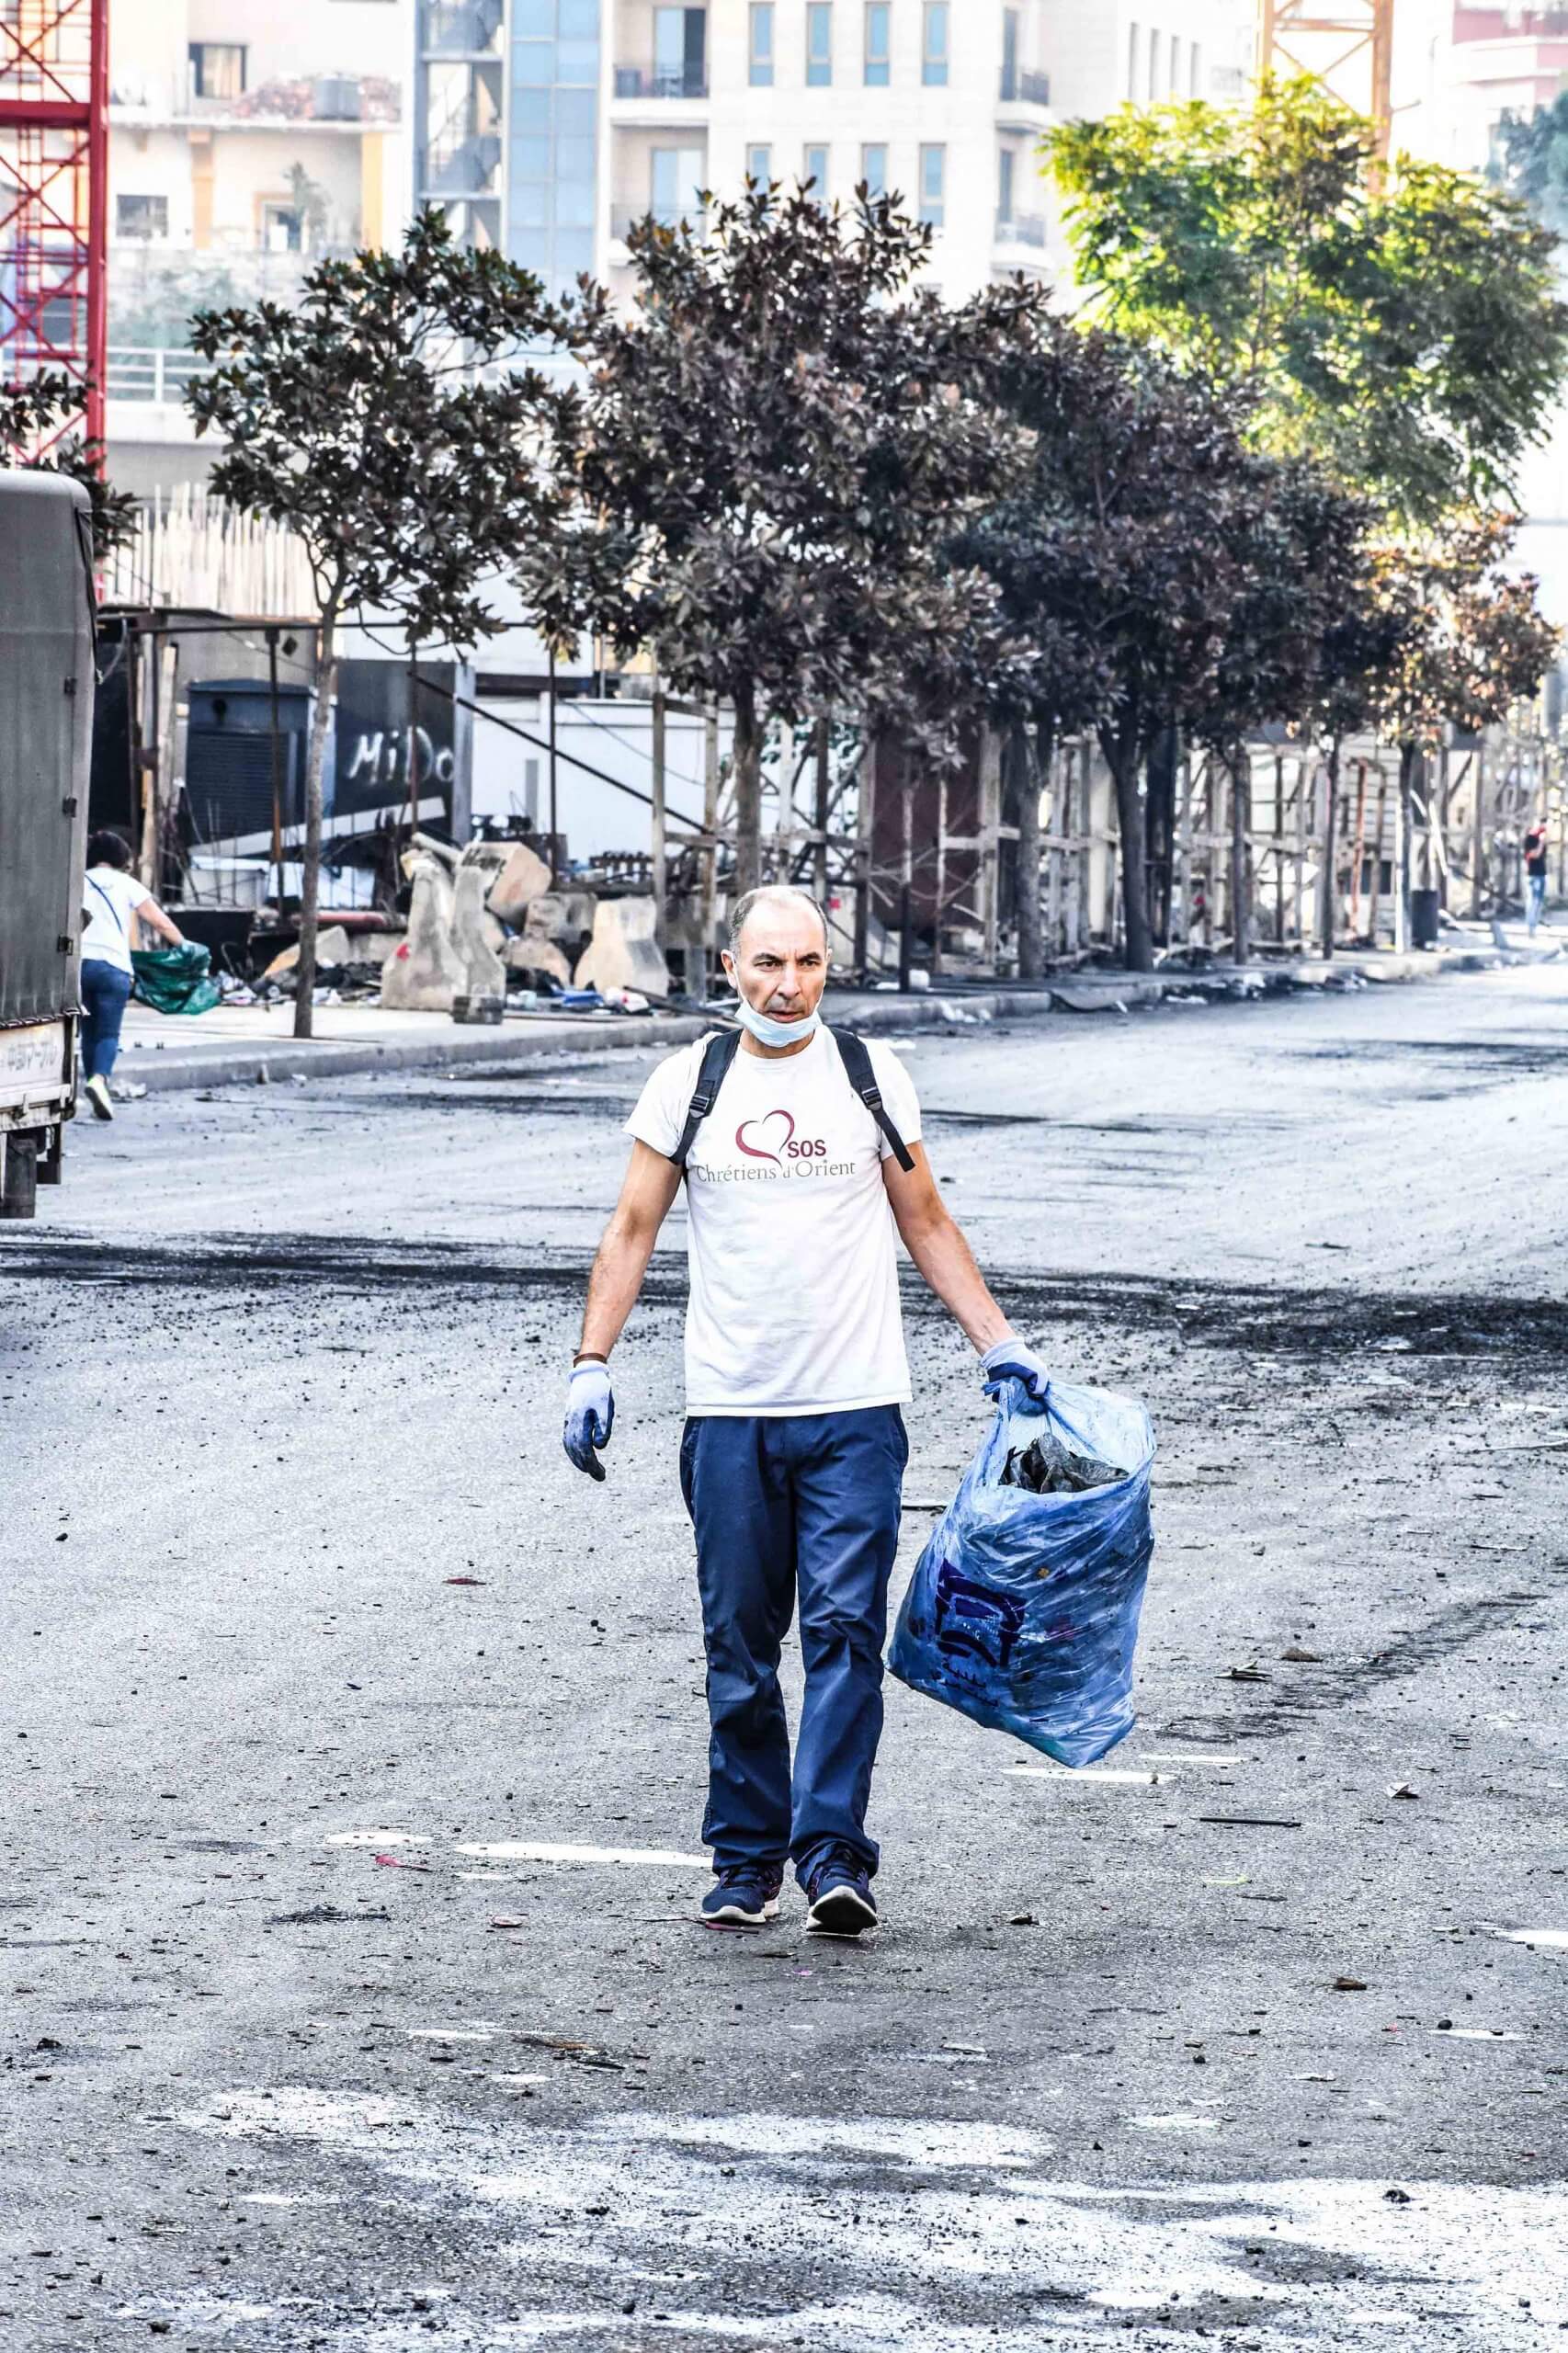 In Beirut, volunteers help clean up Martyrs' Square after protests